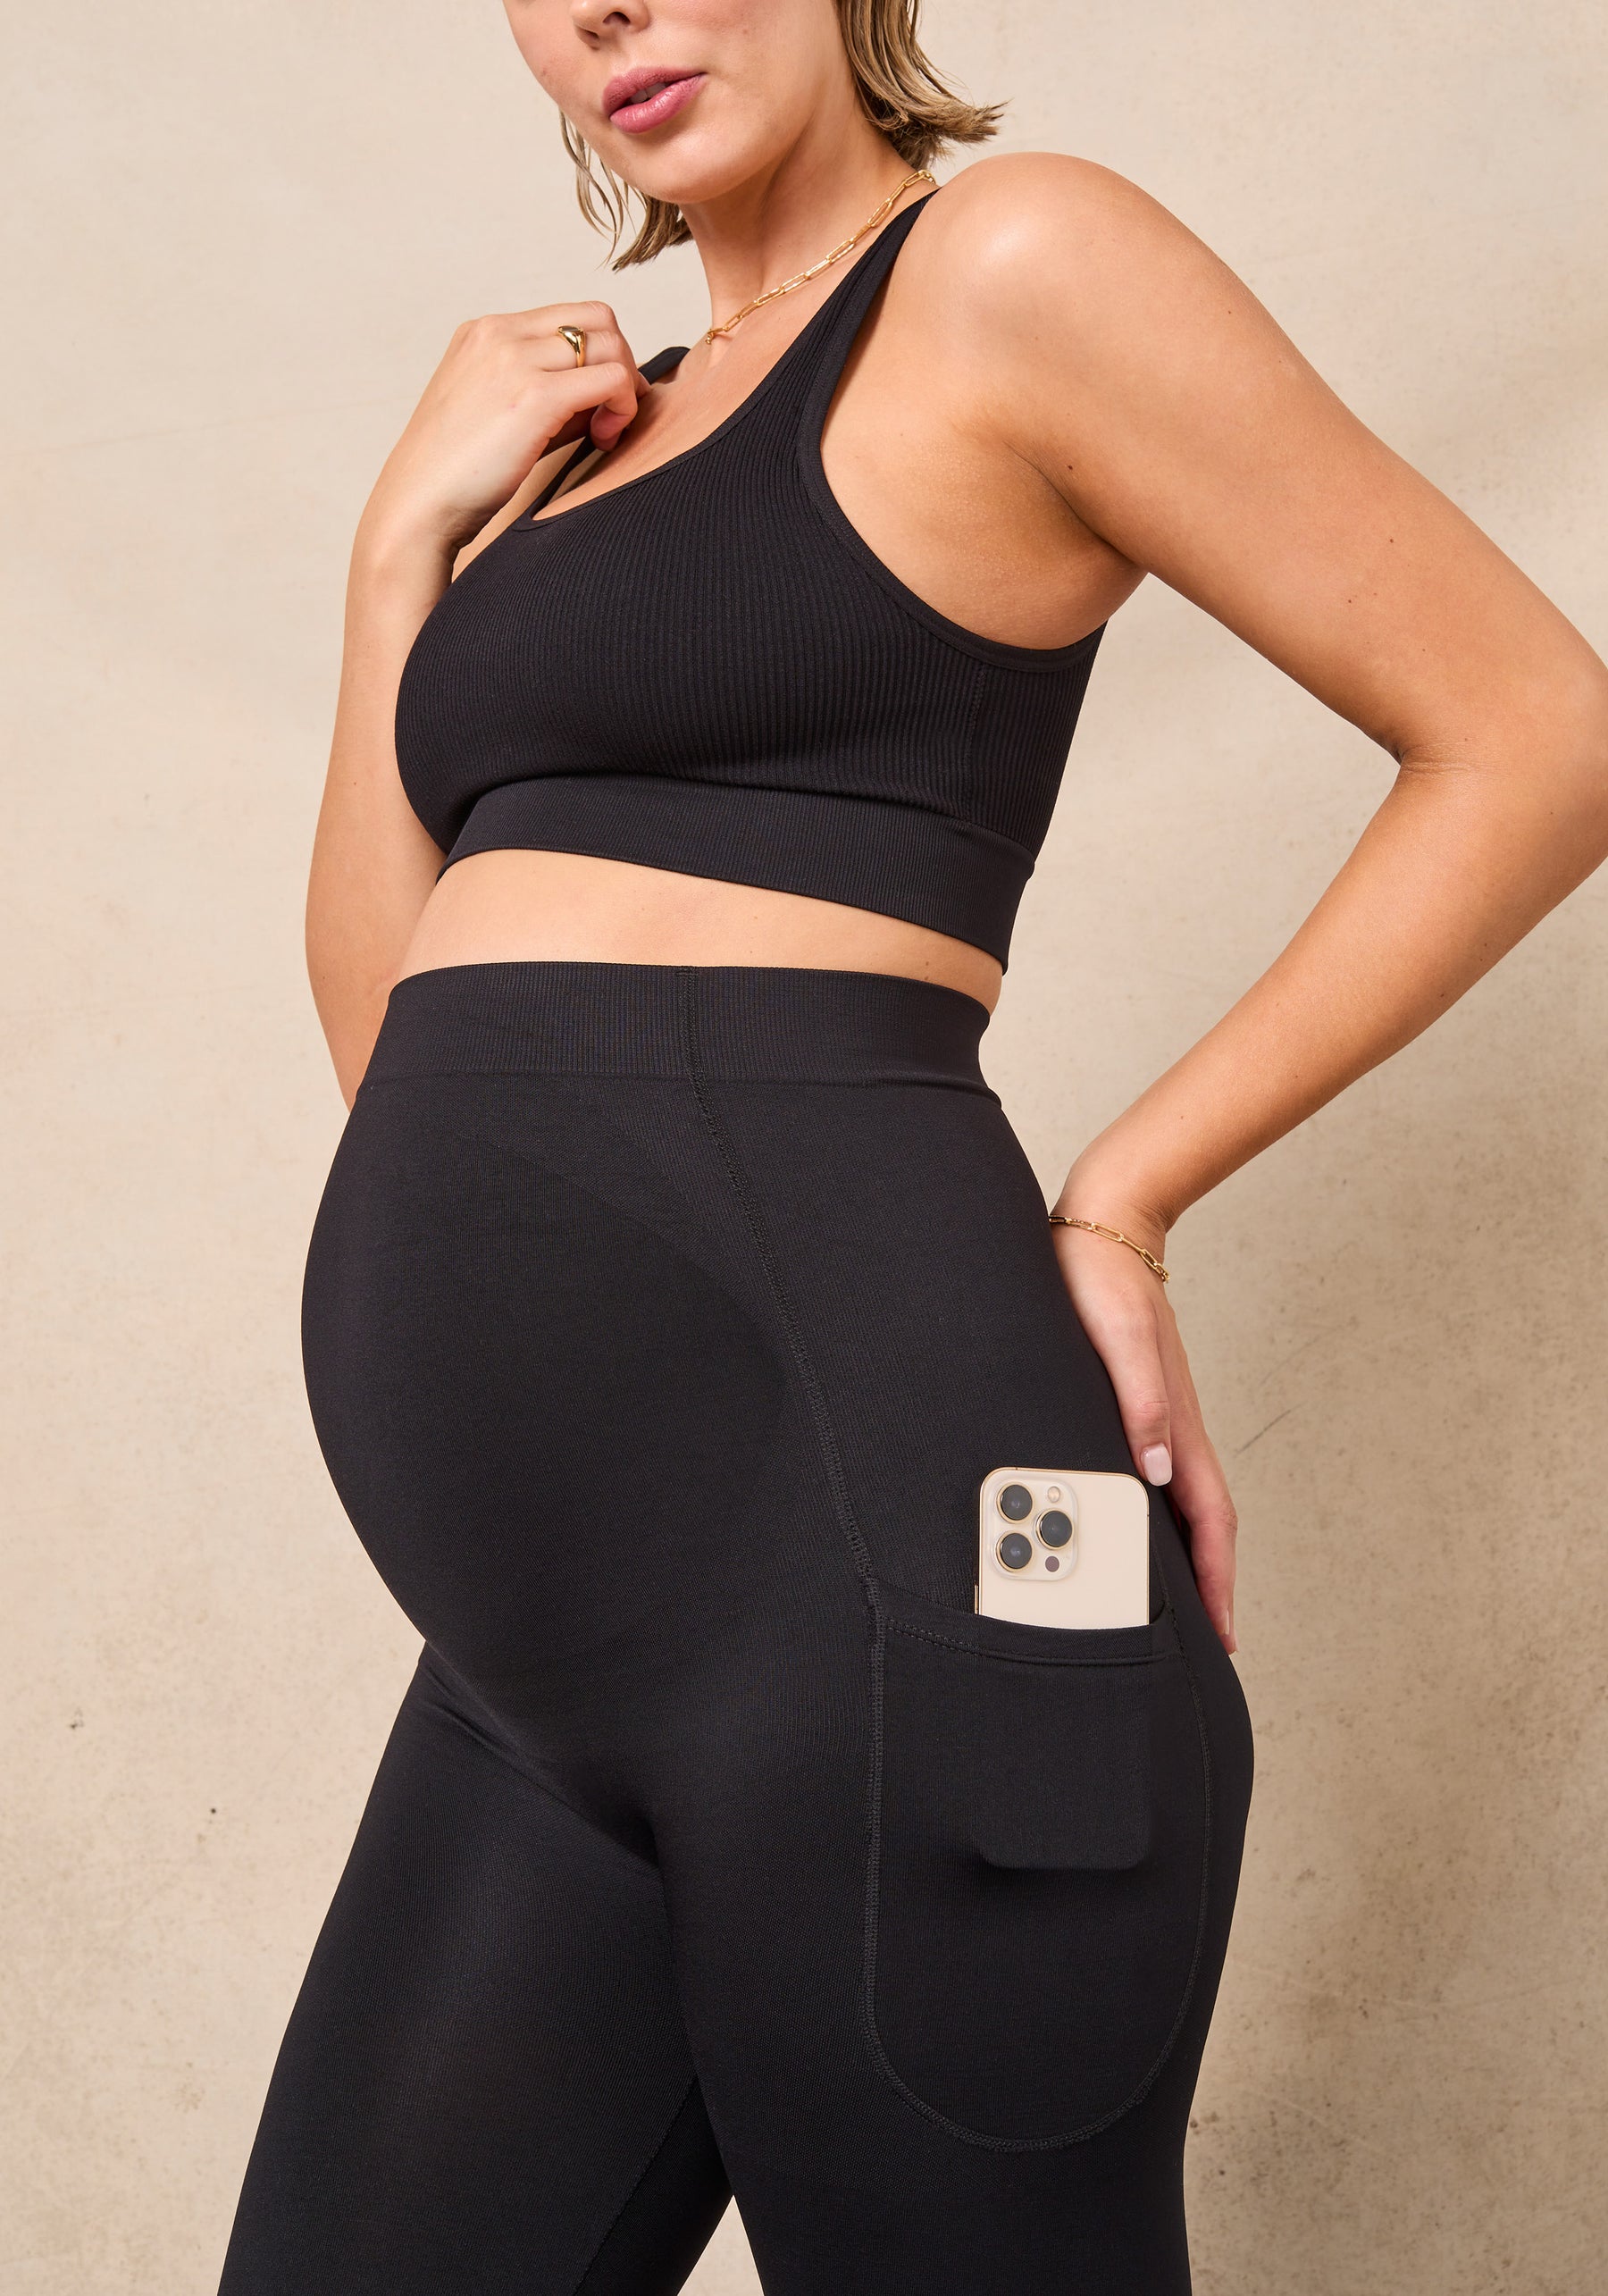 TNNZEET Maternity Leggings Over The Belly with Pockets, Black